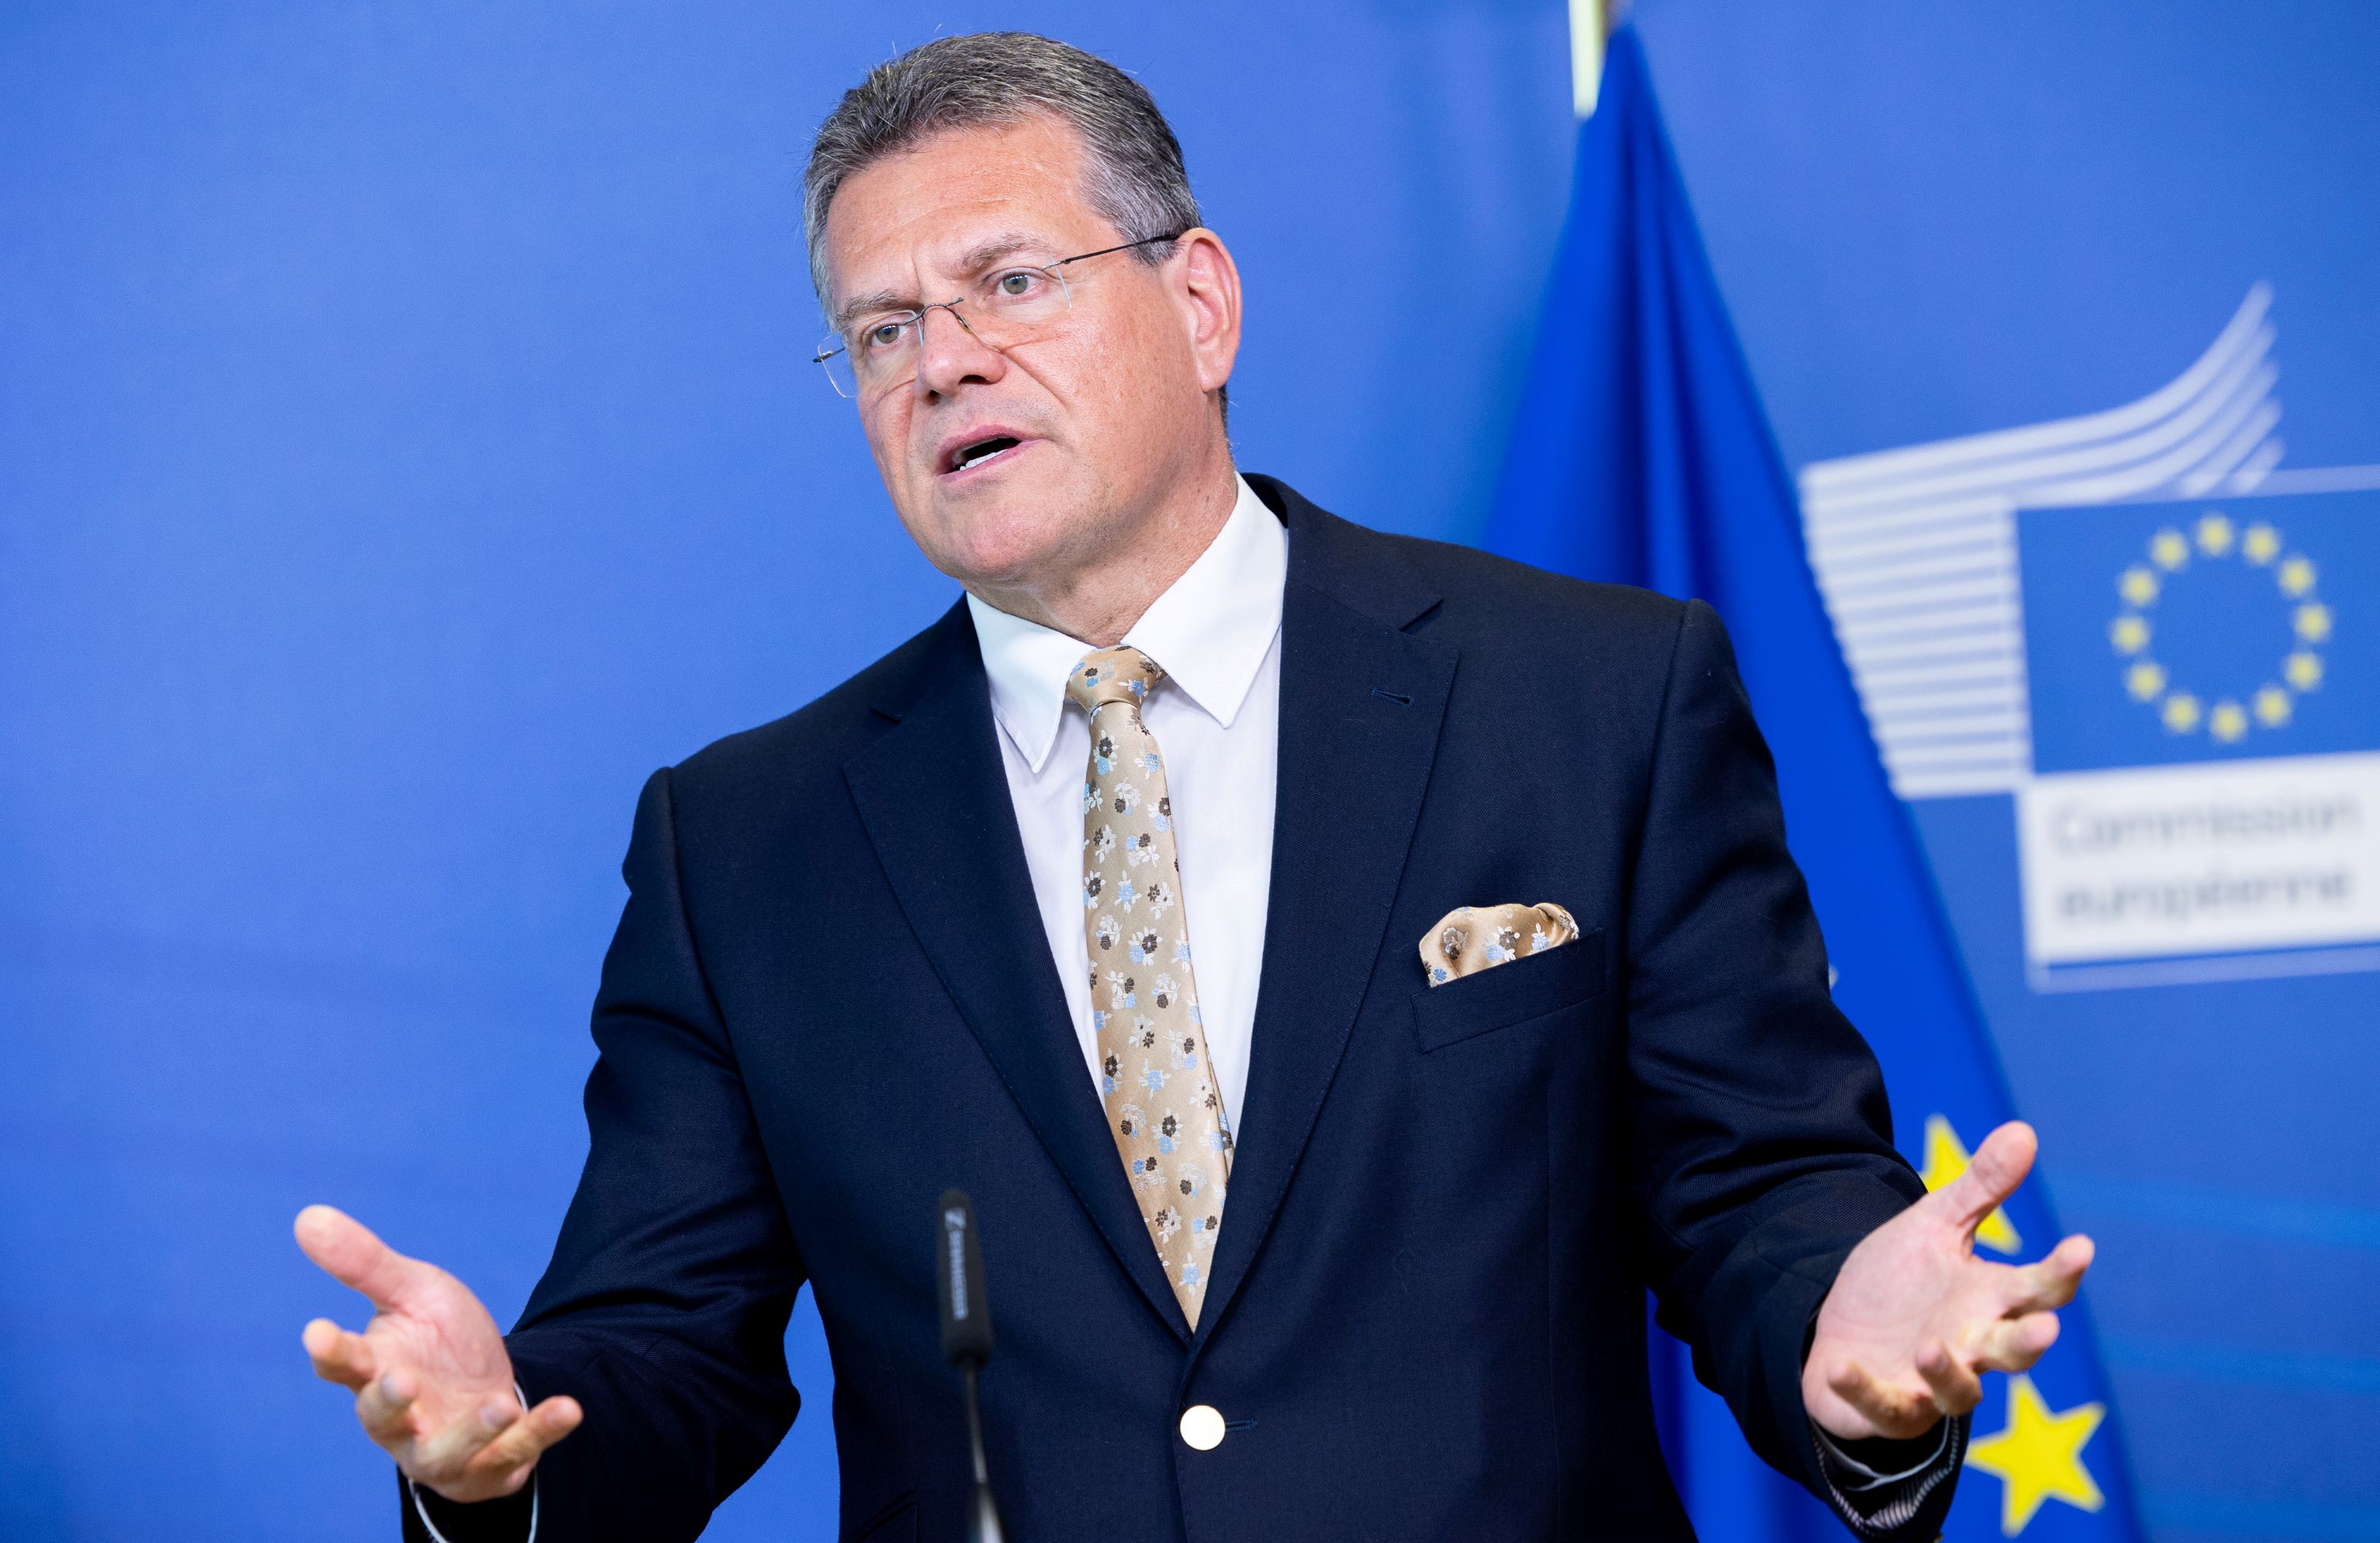 Vice-President of the European Commission in charge of Interinstitutional relations, Maros Sefcovic speaking to the reporters